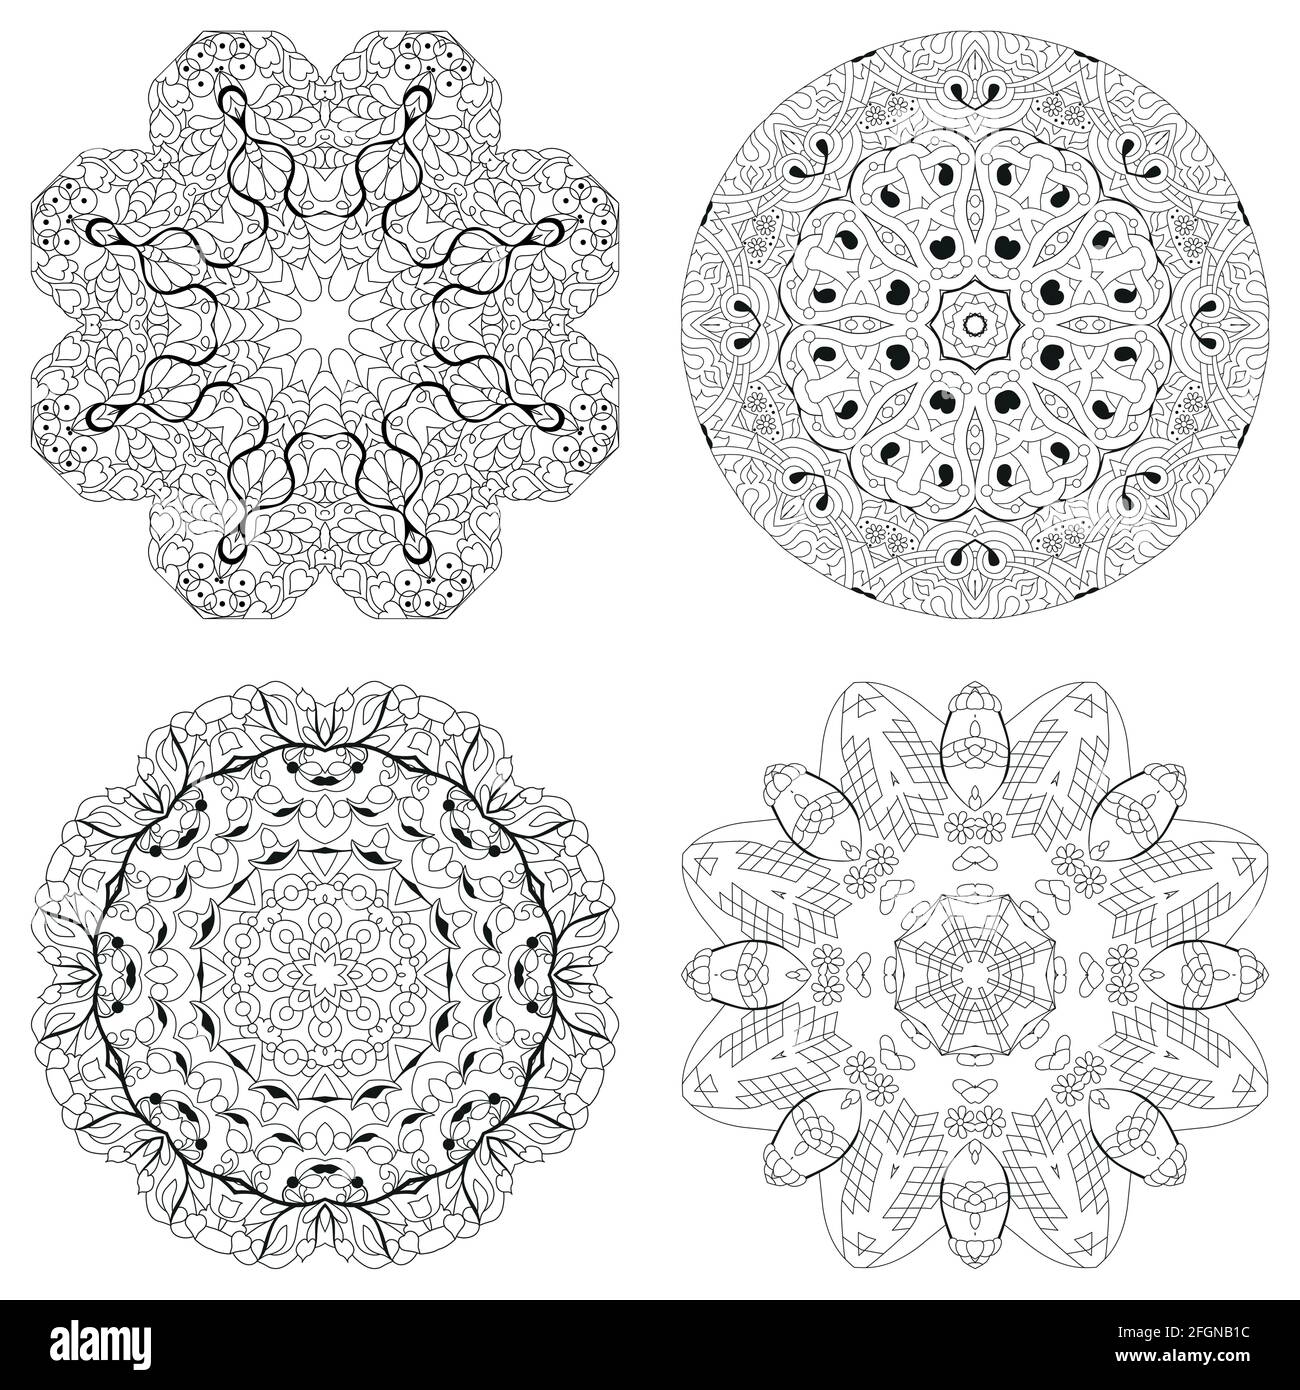 Vector Adult Coloring Book Textures. Hand-painted art design. Adult anti-stress coloring page. Black and white hand drawn illustration set of 4 mandal Stock Vector